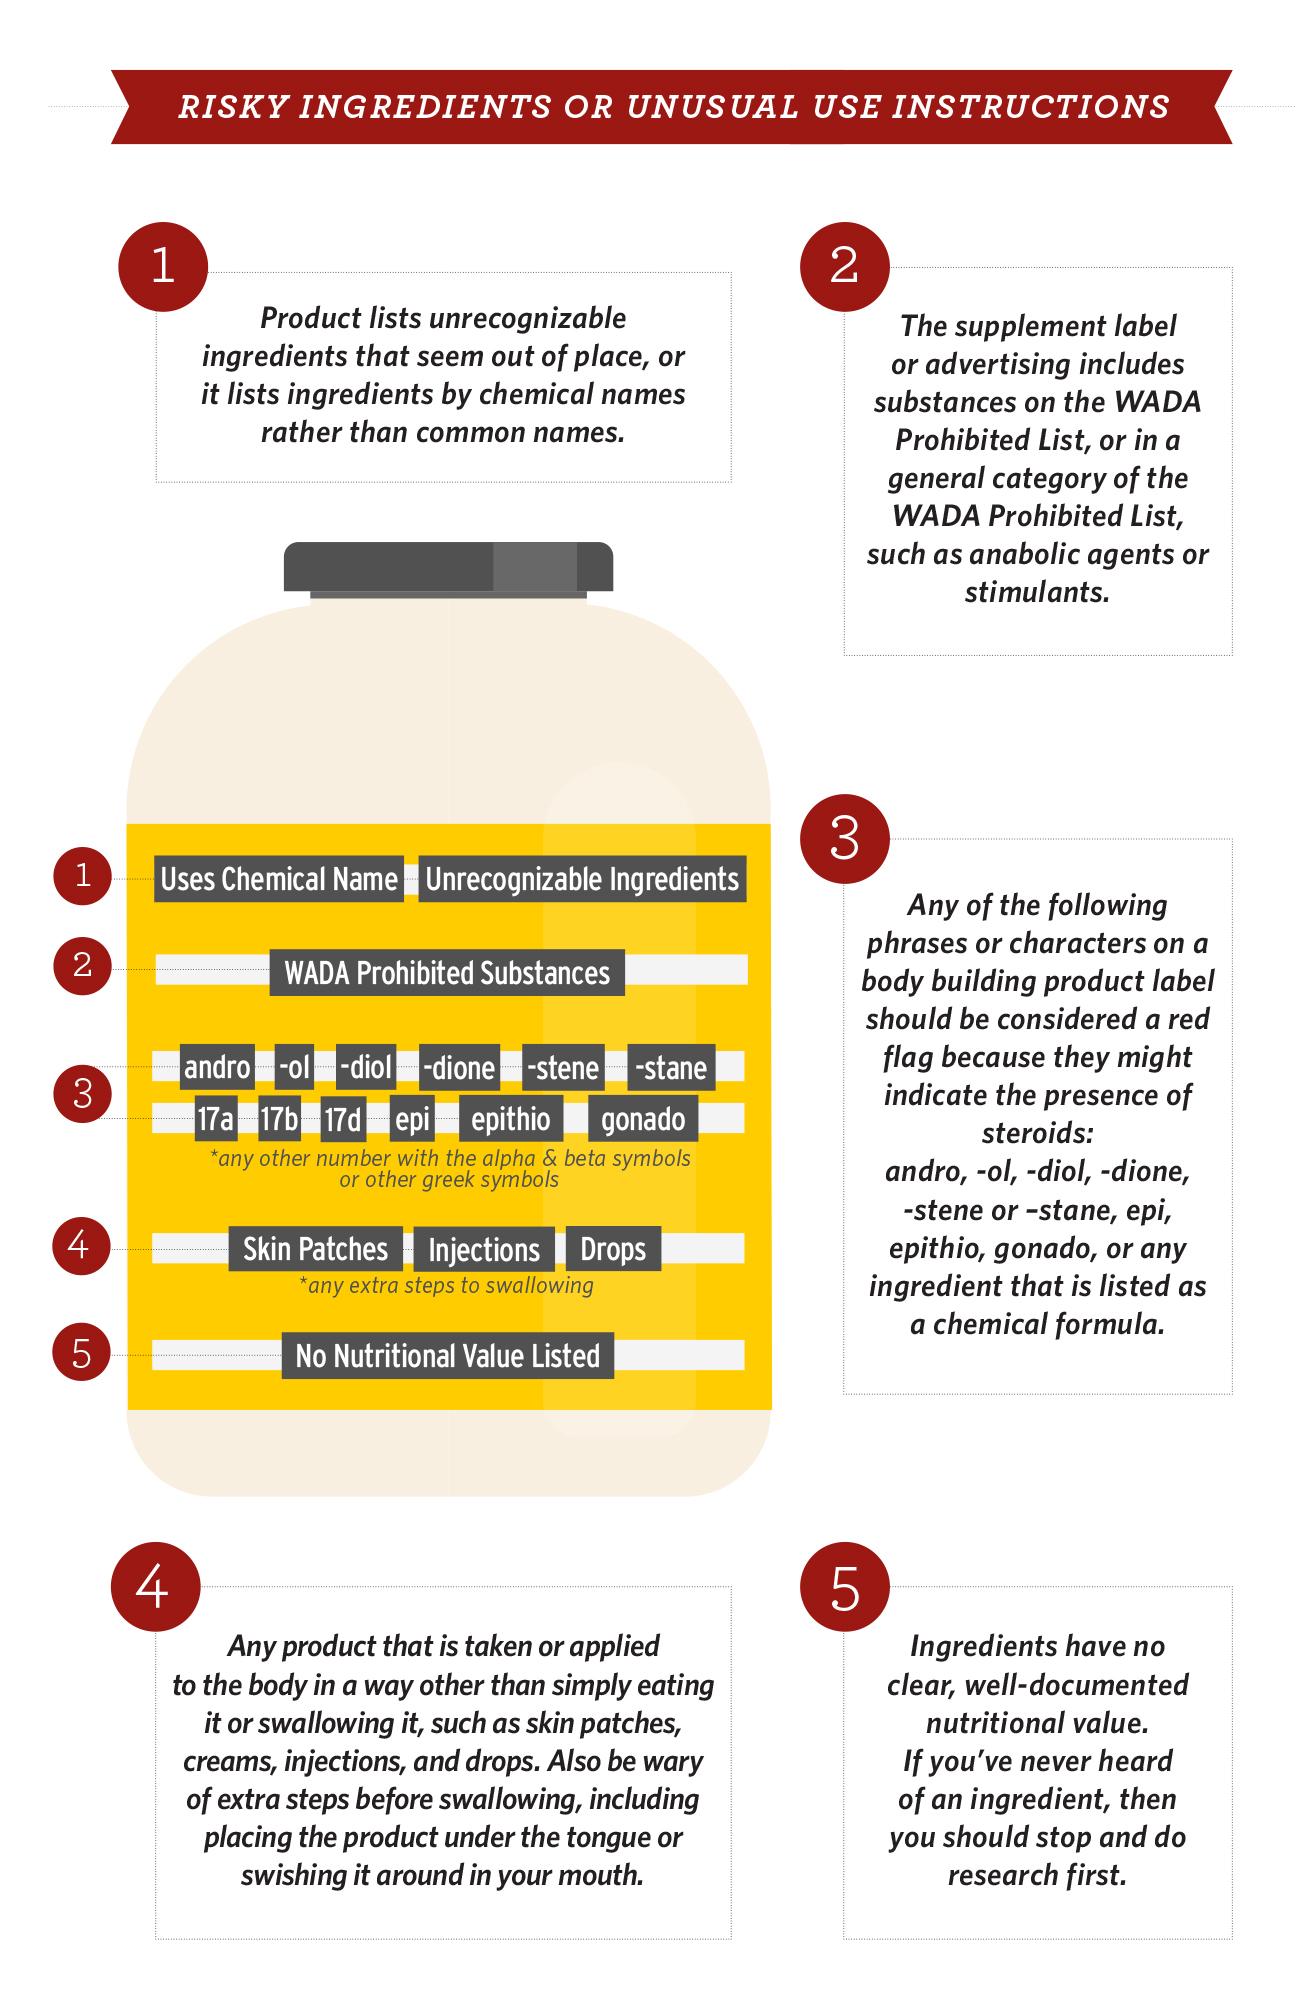 Graphic of risky supplement ingredients and use directions.